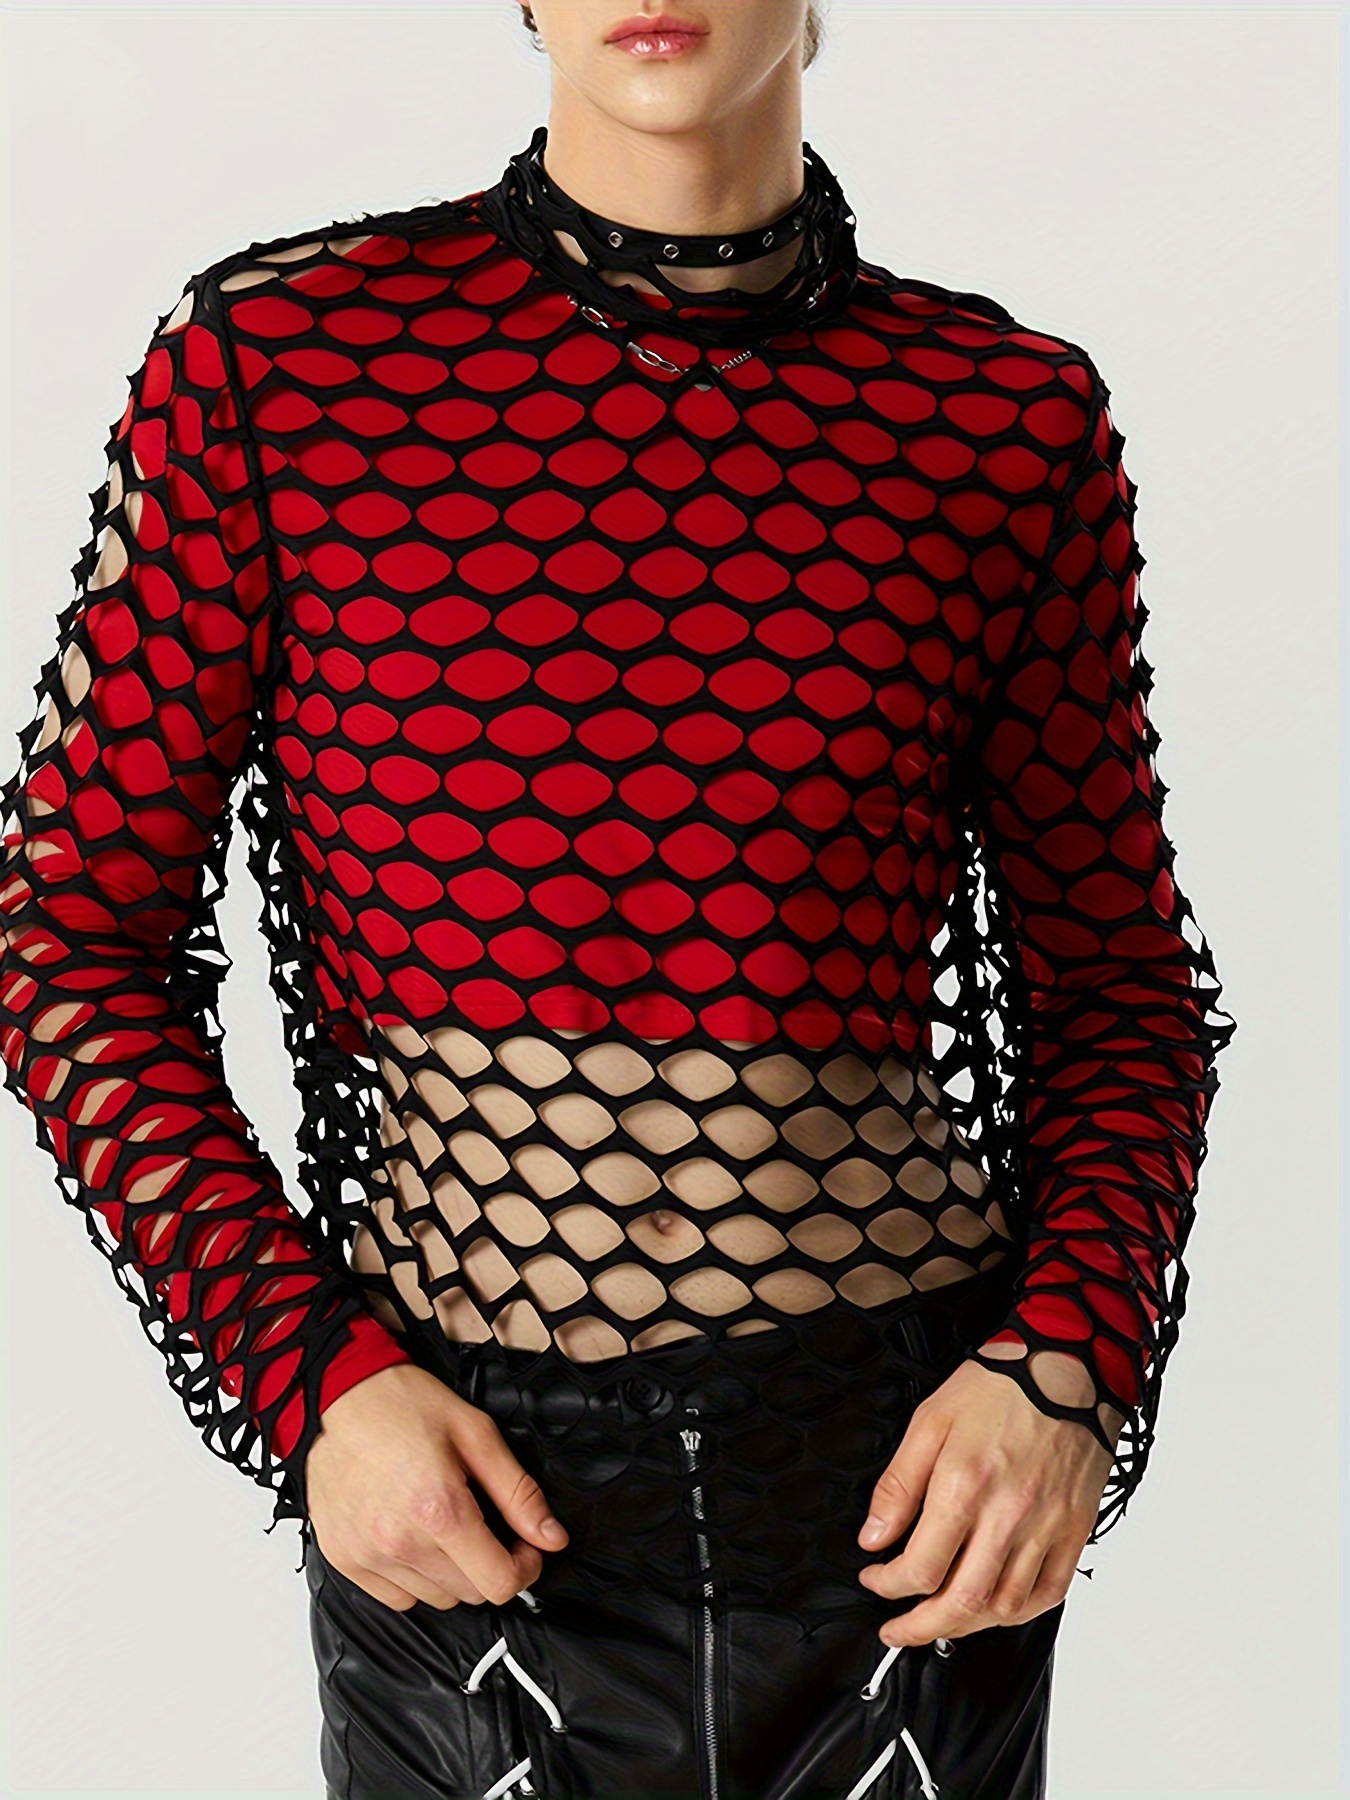 Men's Fishnet Shirts Mesh Crop Top See Through Round Neck Short Sleeve Sexy  Muscle Tee